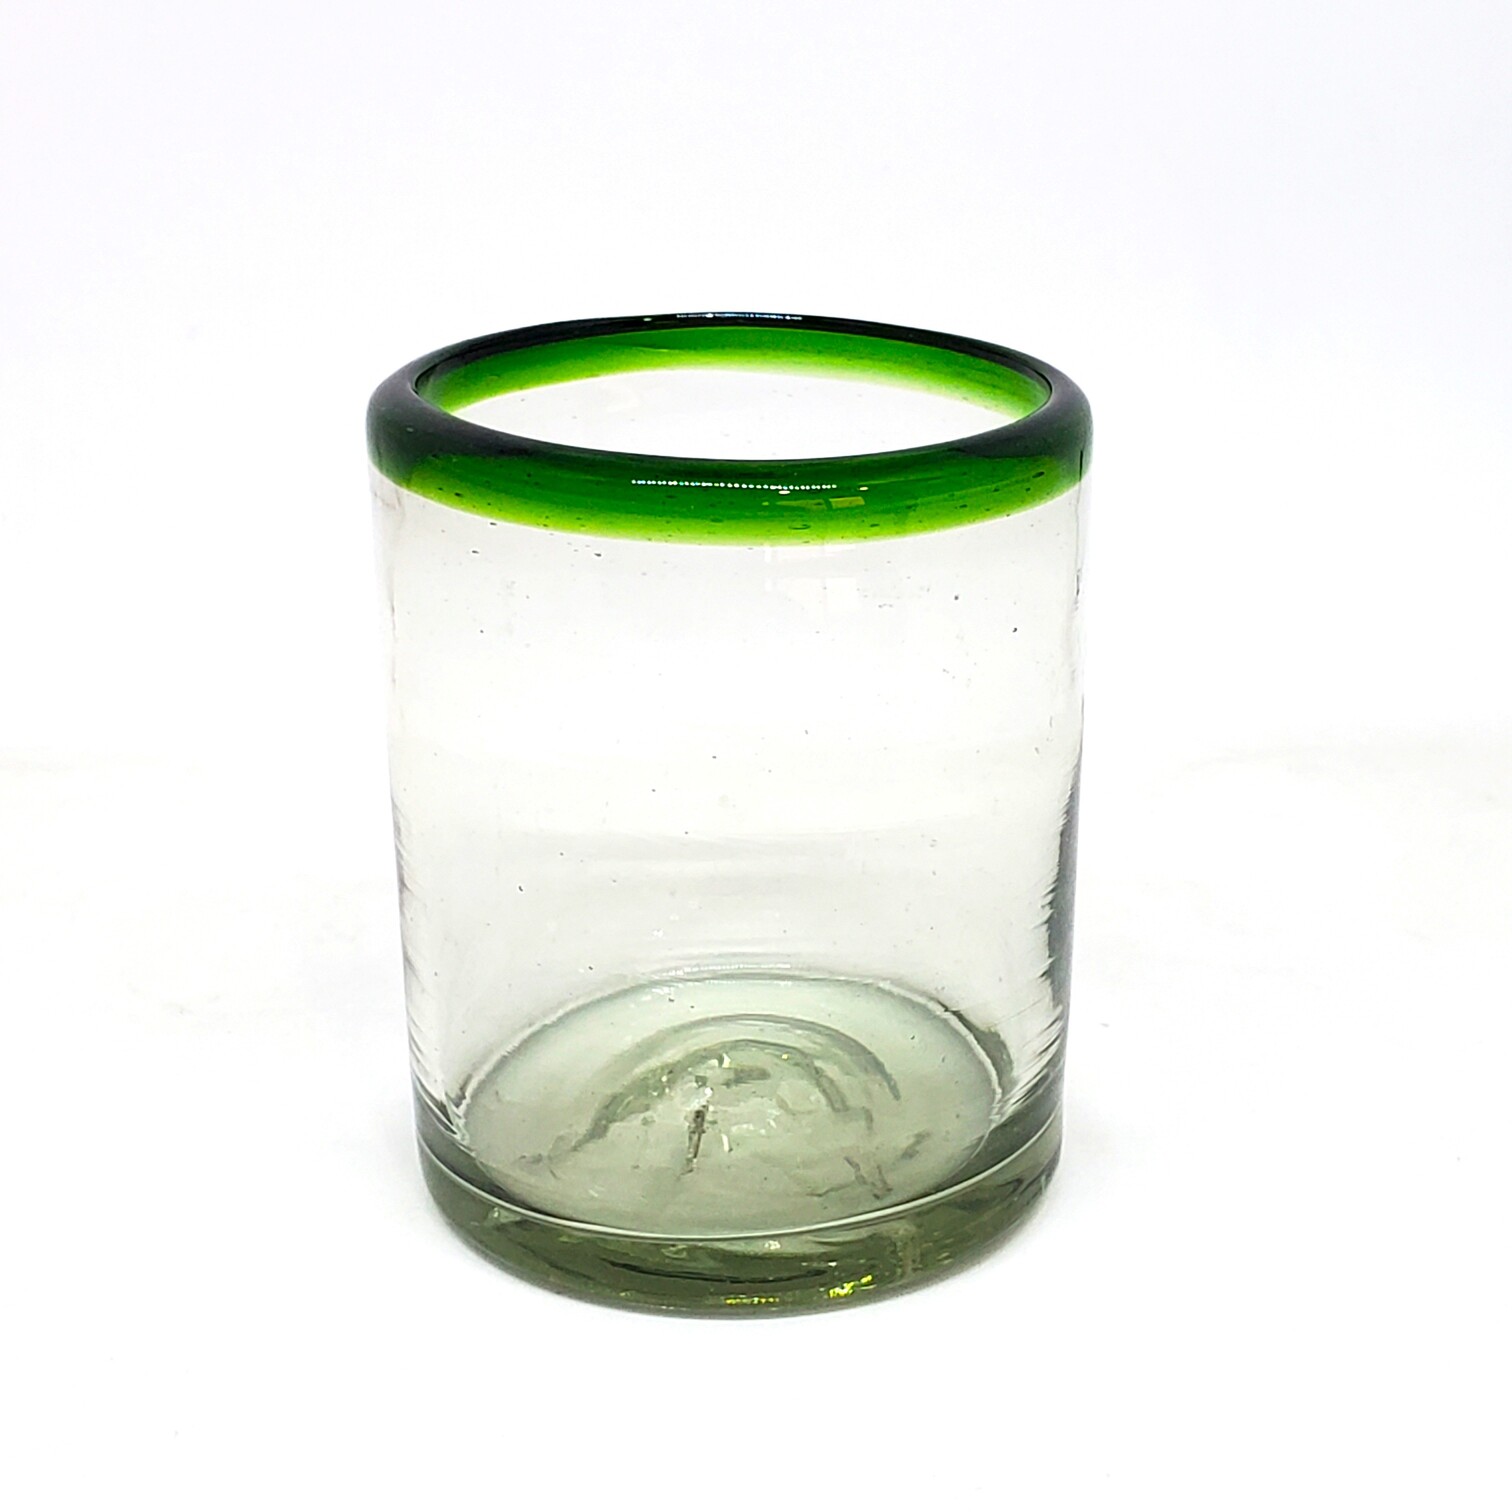 Wholesale Mexican Glasses / Emerald Green Rim 10 oz Tumblers  / This festive set of tumblers is great for a glass of milk with cookies or a lemonade on a hot summer day.